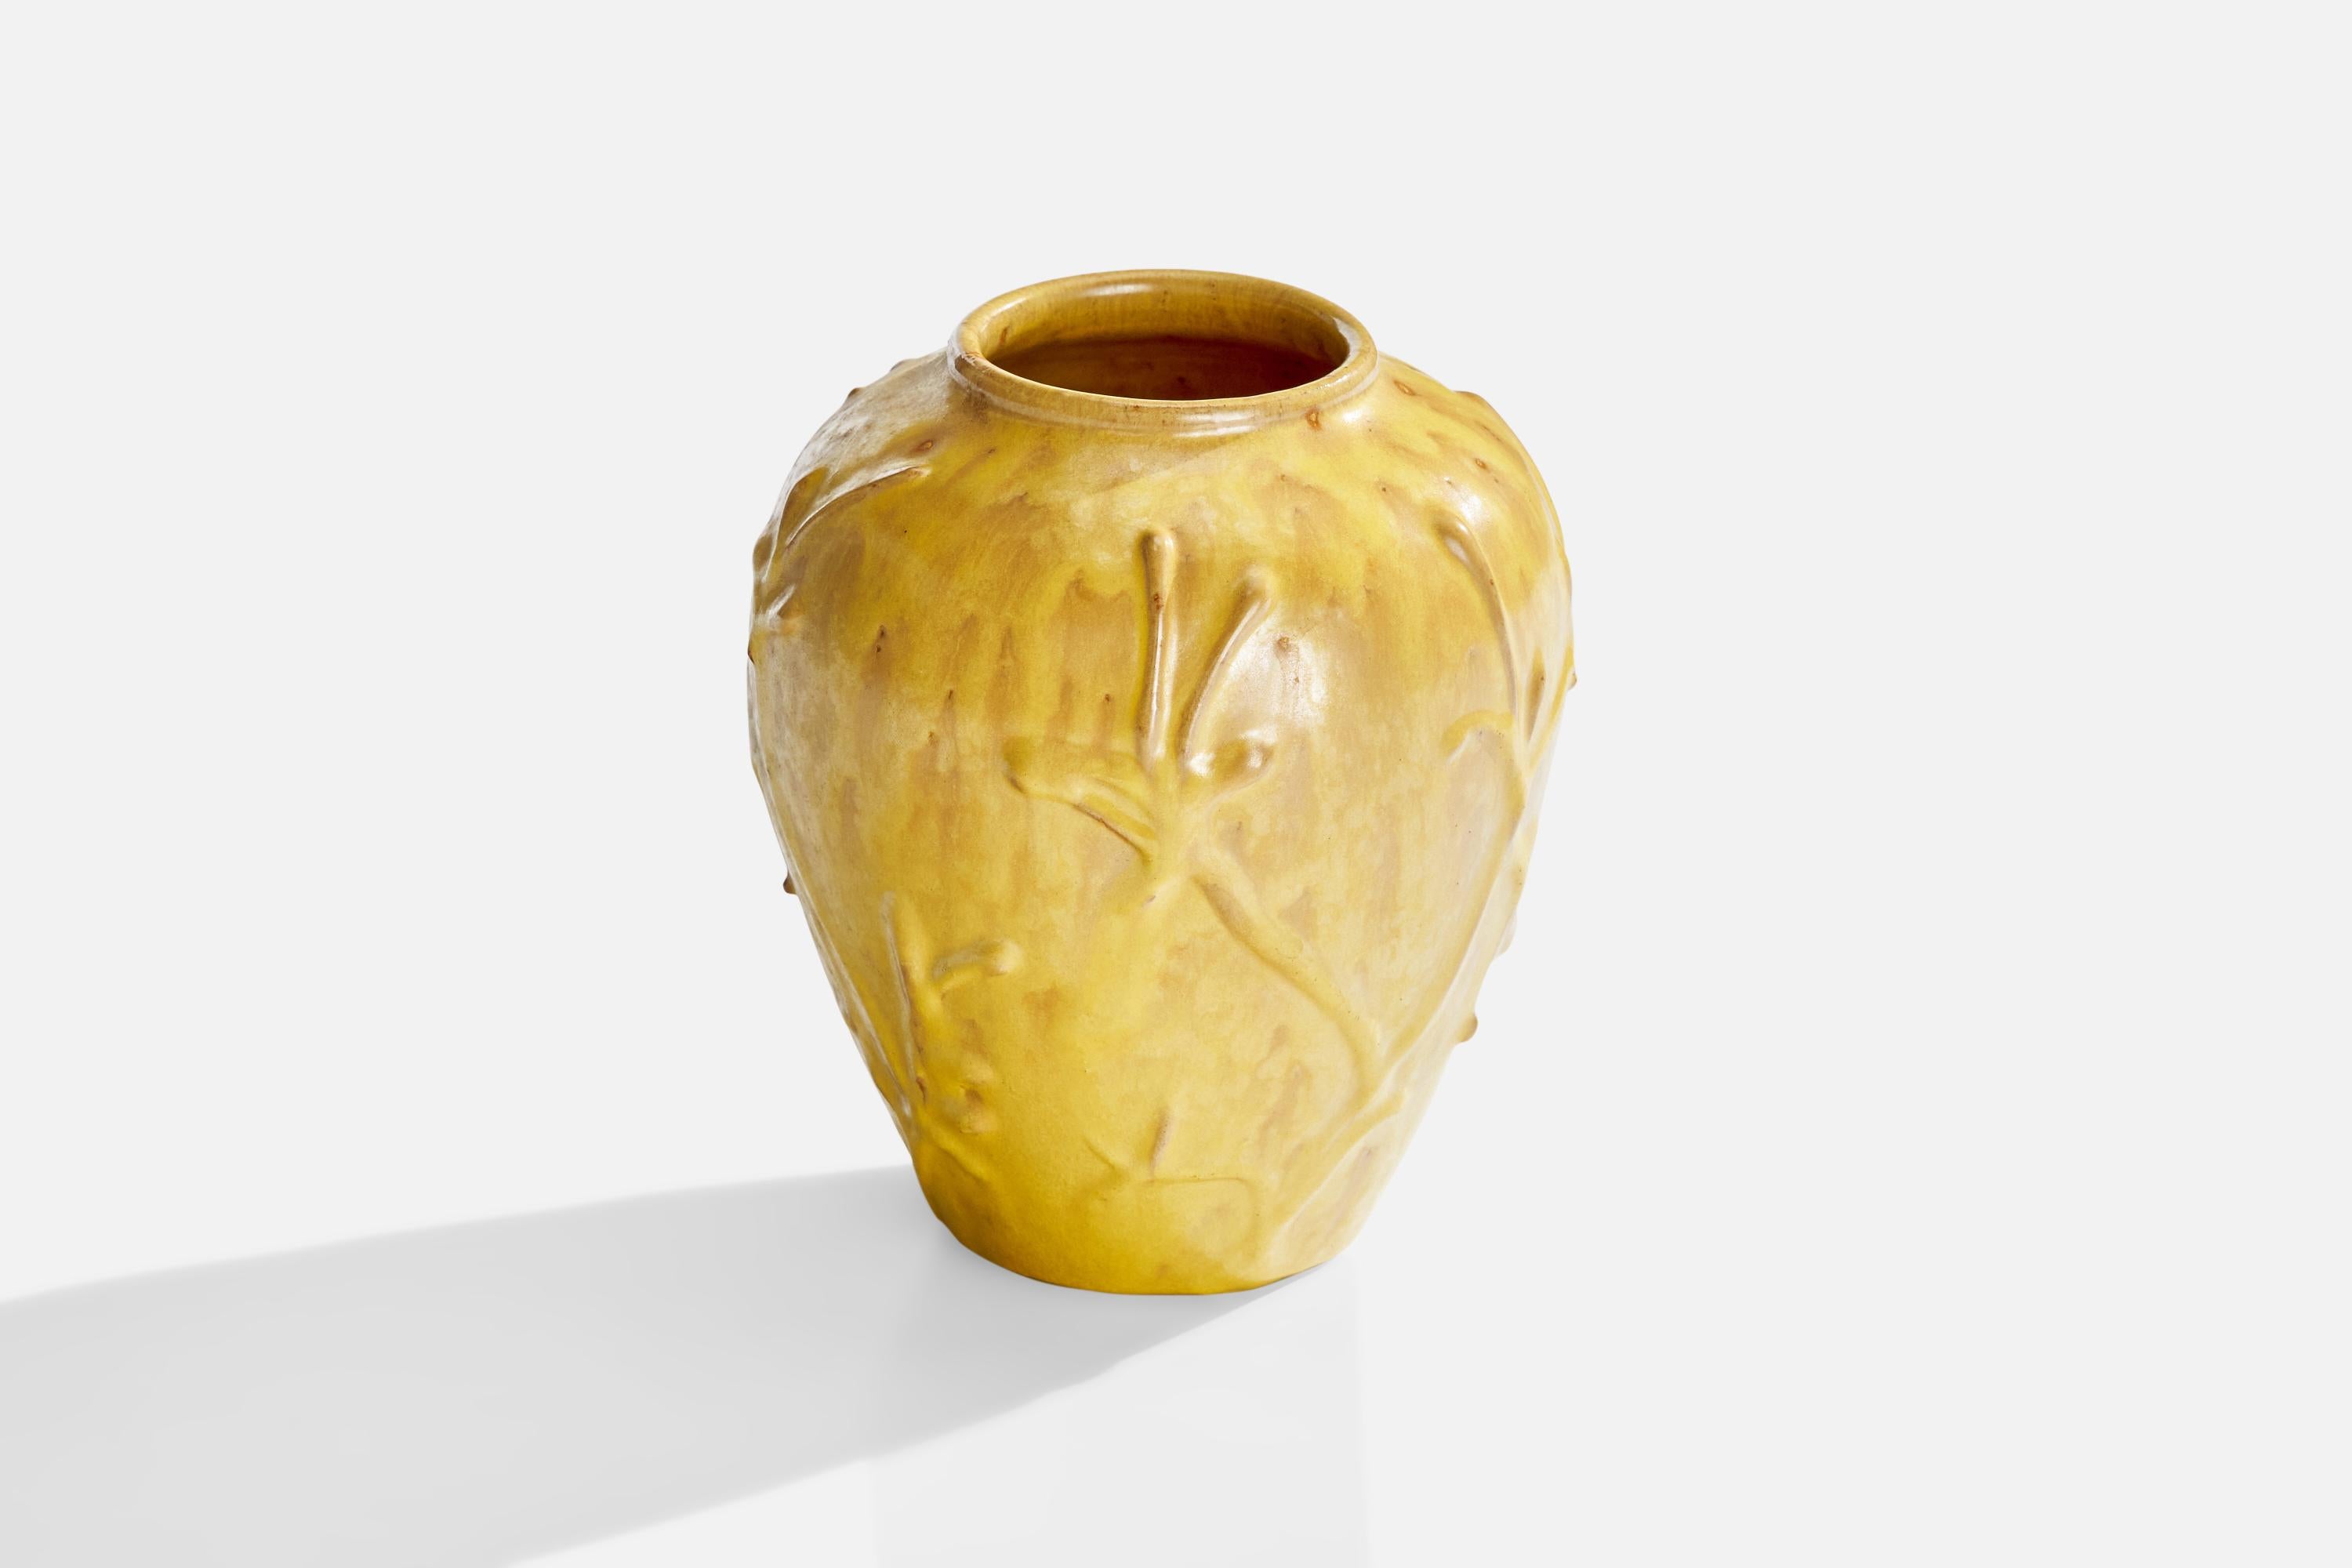 A yellow-glazed ceramic vase designed and produced by Nittsjö, Sweden, 1930s.